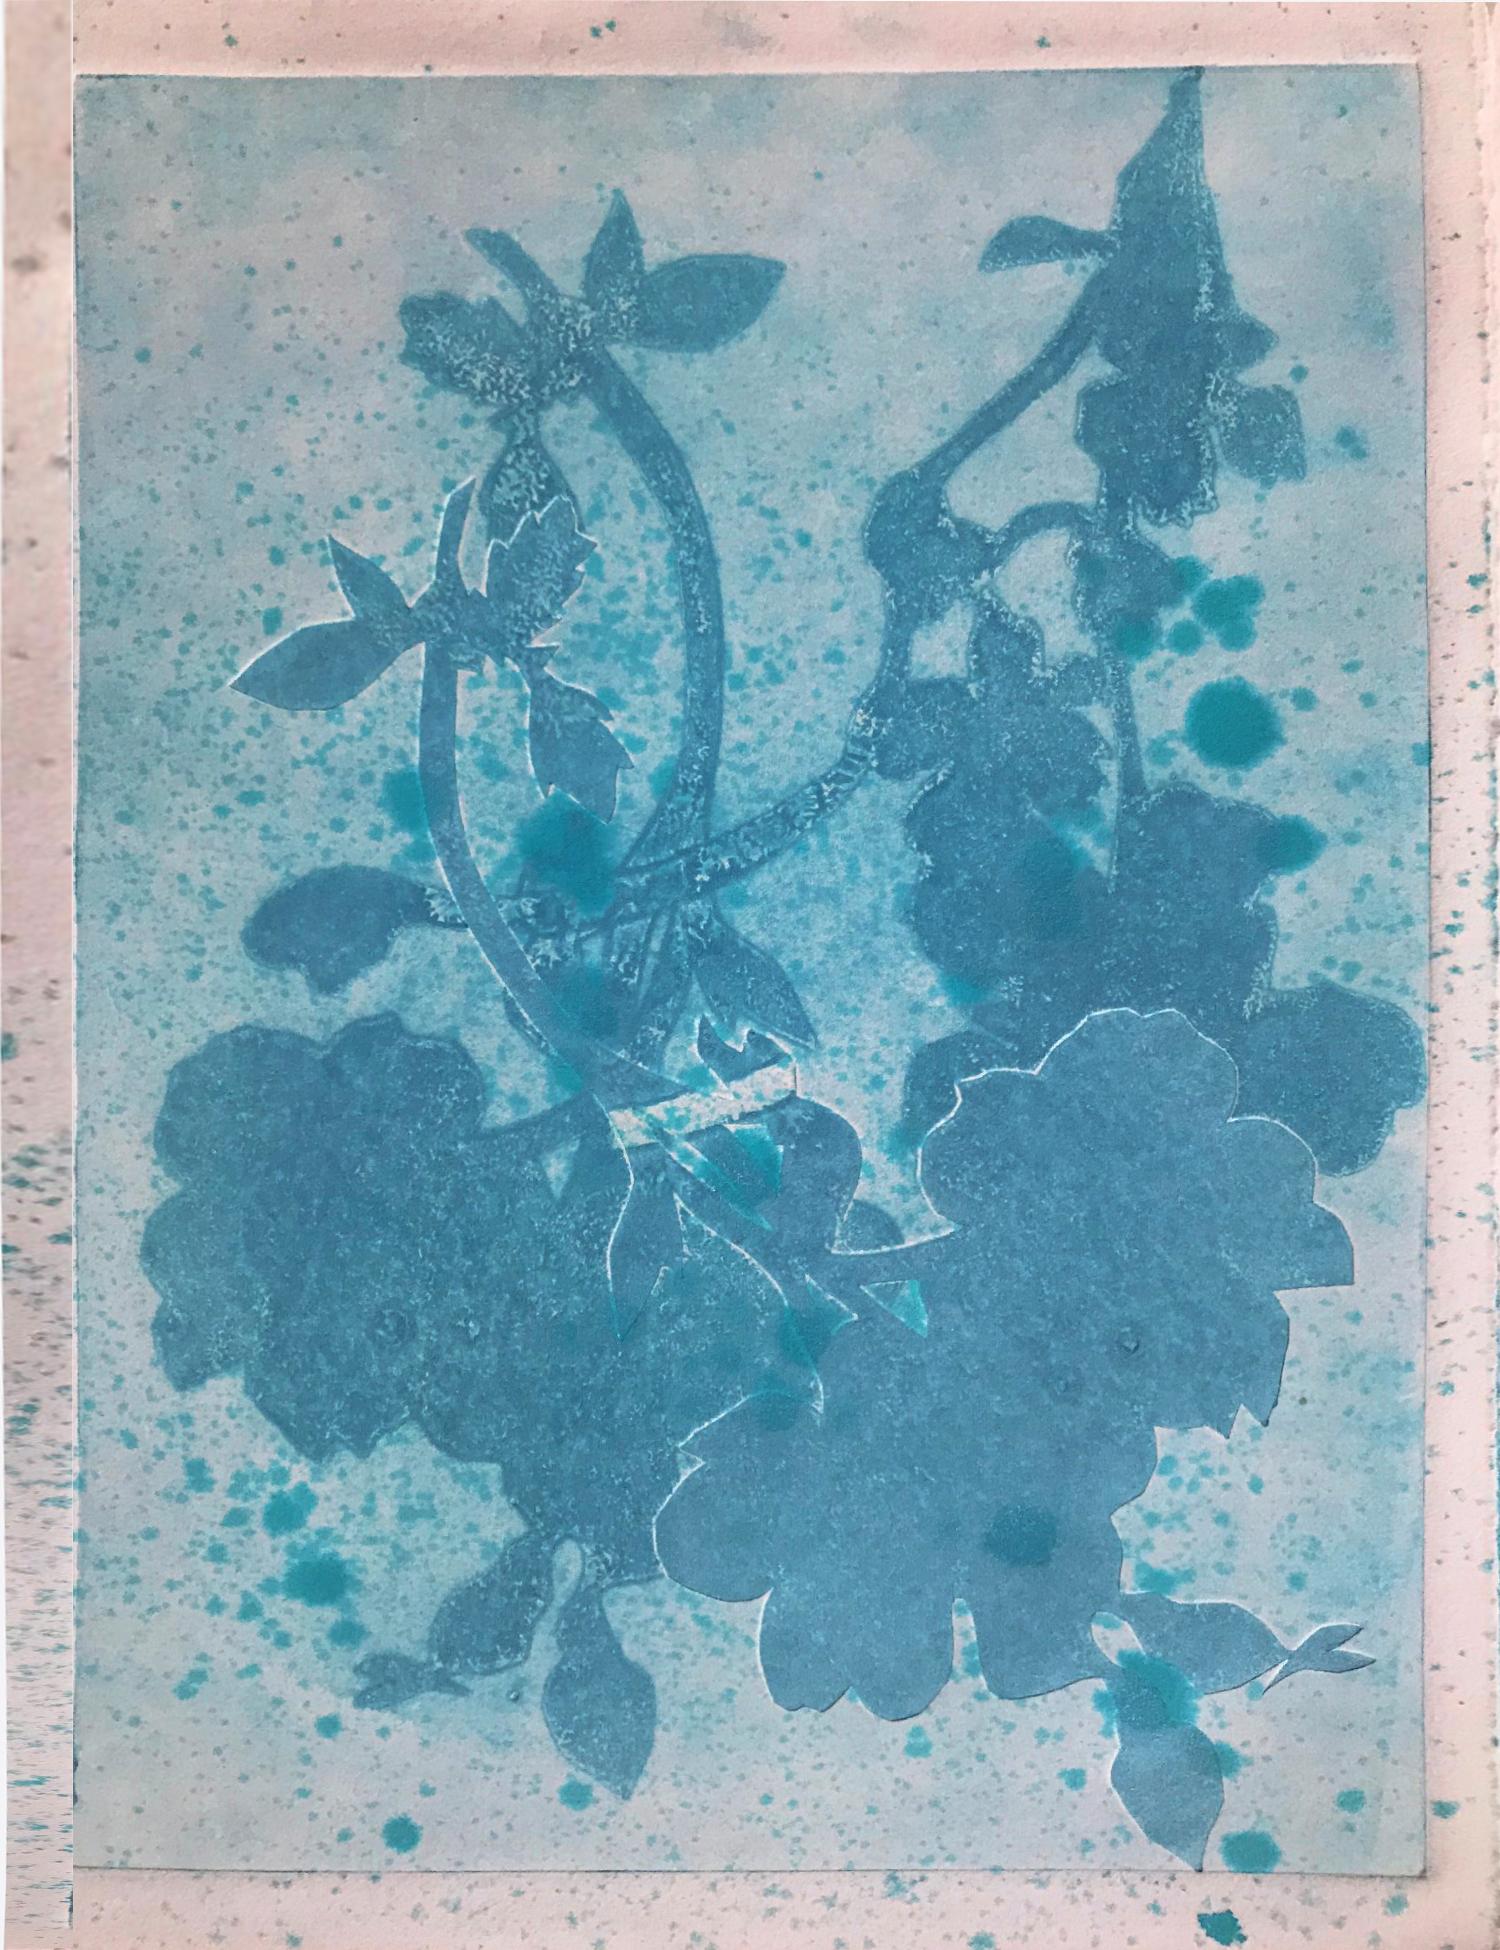 Flower Shadows I, 12 individual floral monotypes together in a grid 3